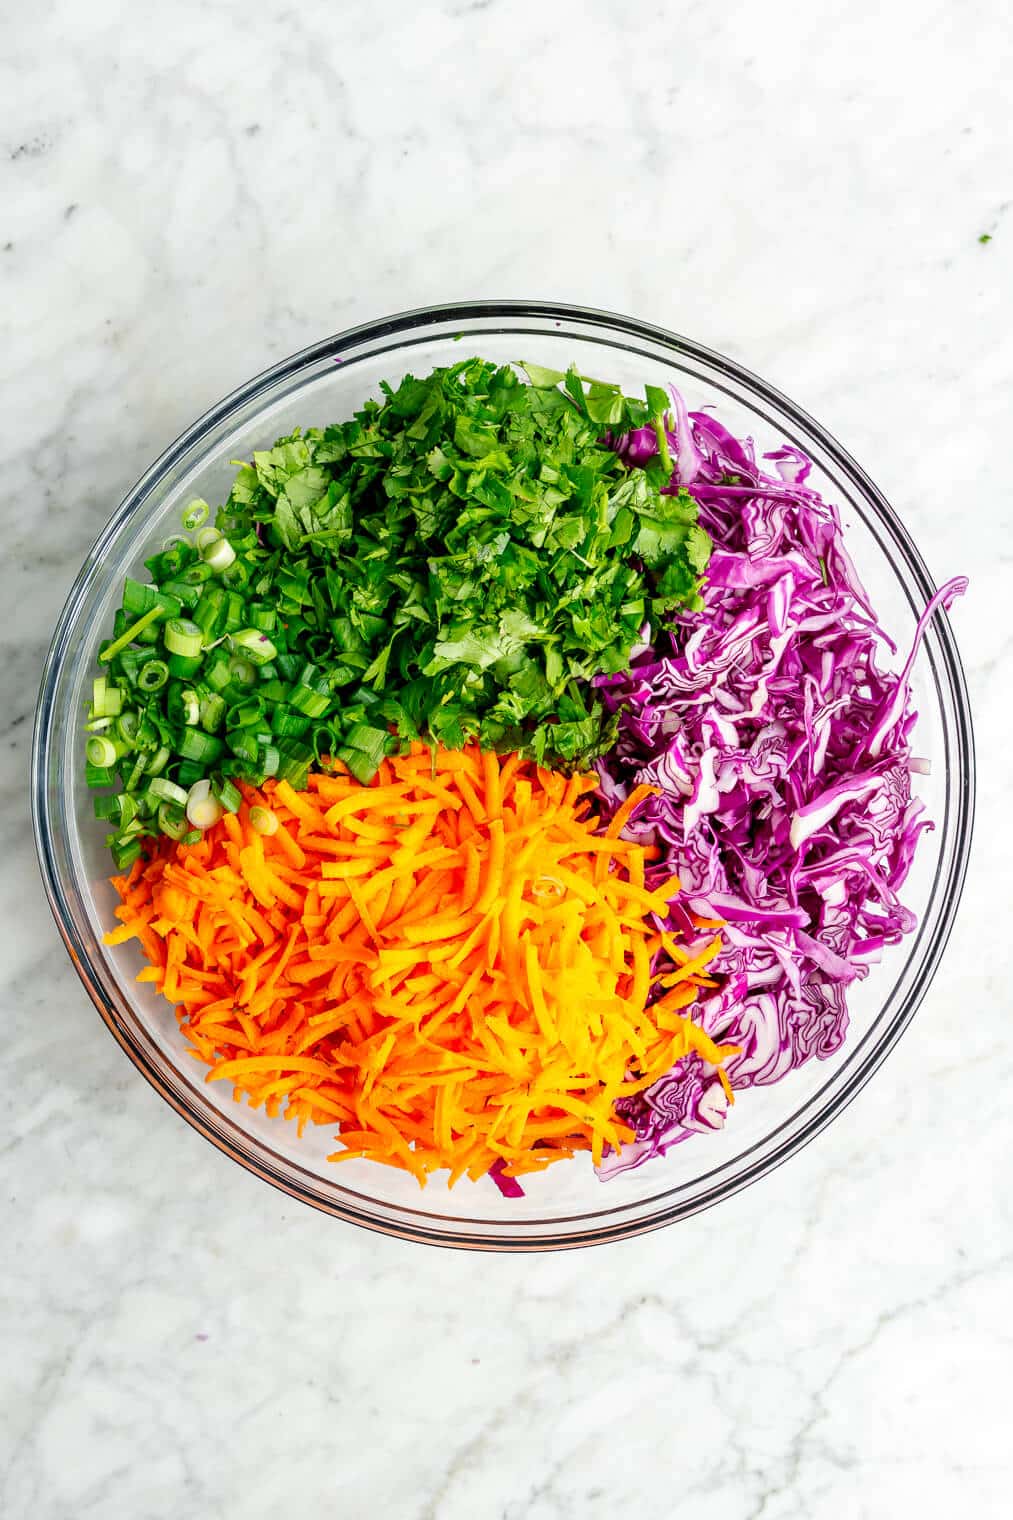 A top down view of a large glass bowl with purple cabbage, shredded carrots, cilantro, and green onions.